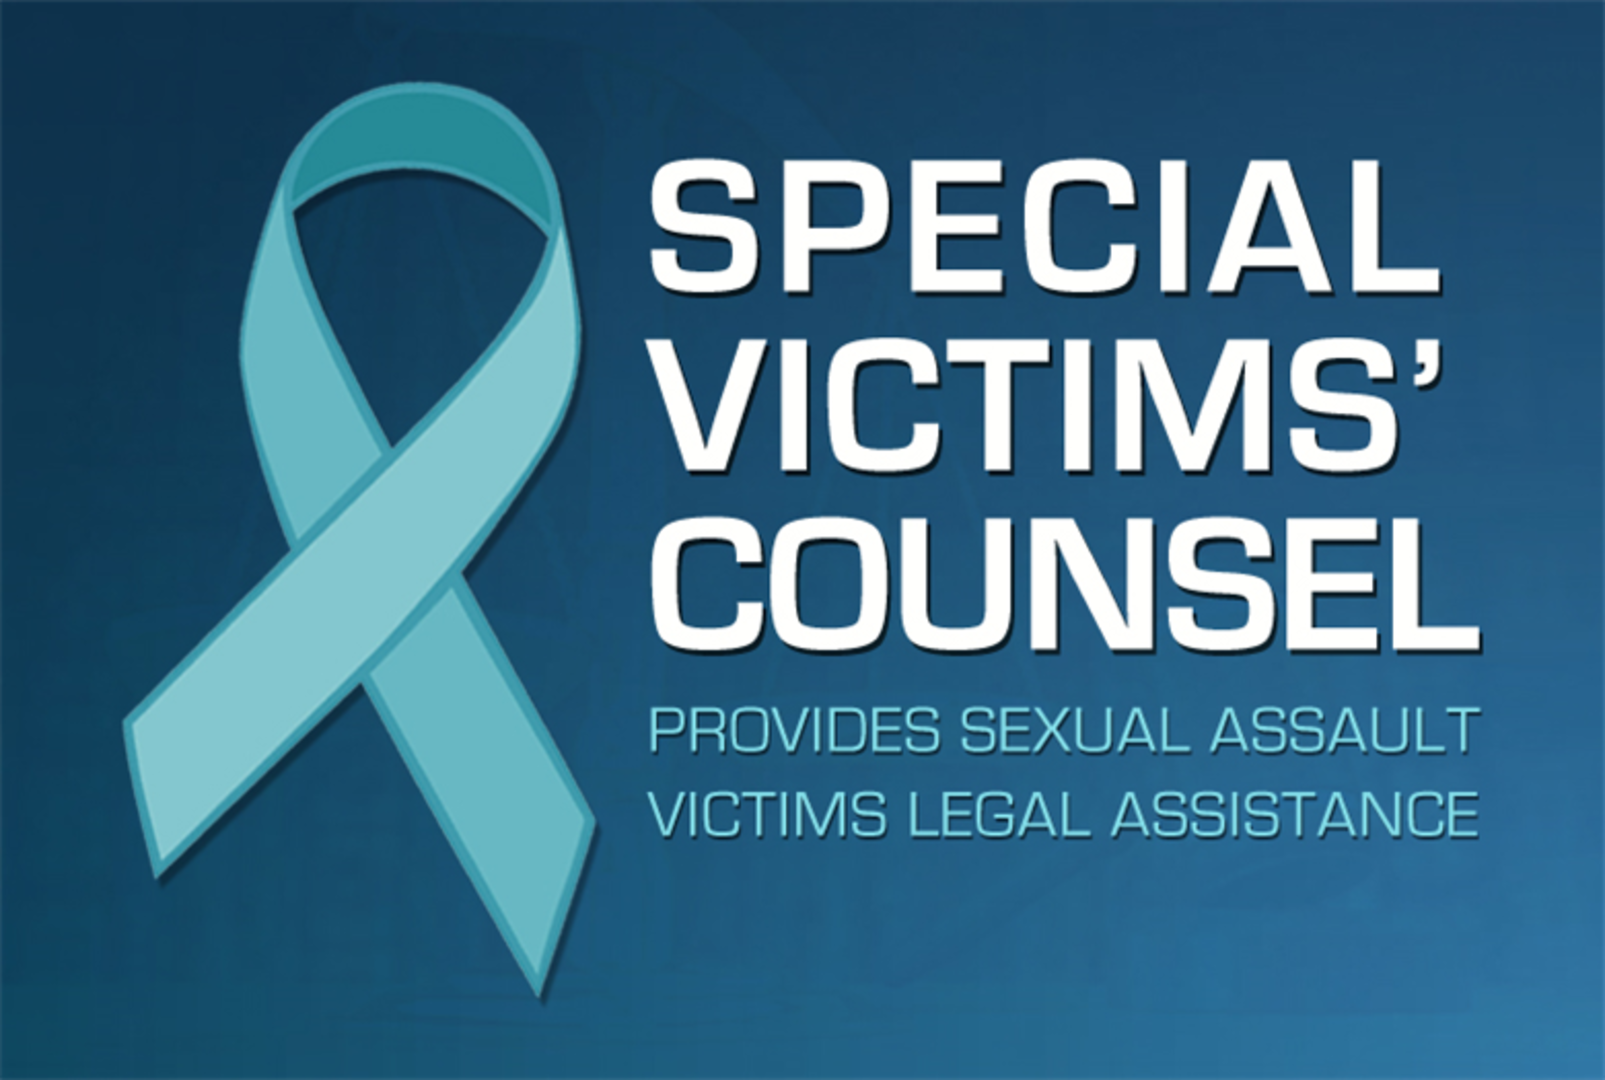 How The Special Victims Counsel Program Serves Joint Base San Antonio